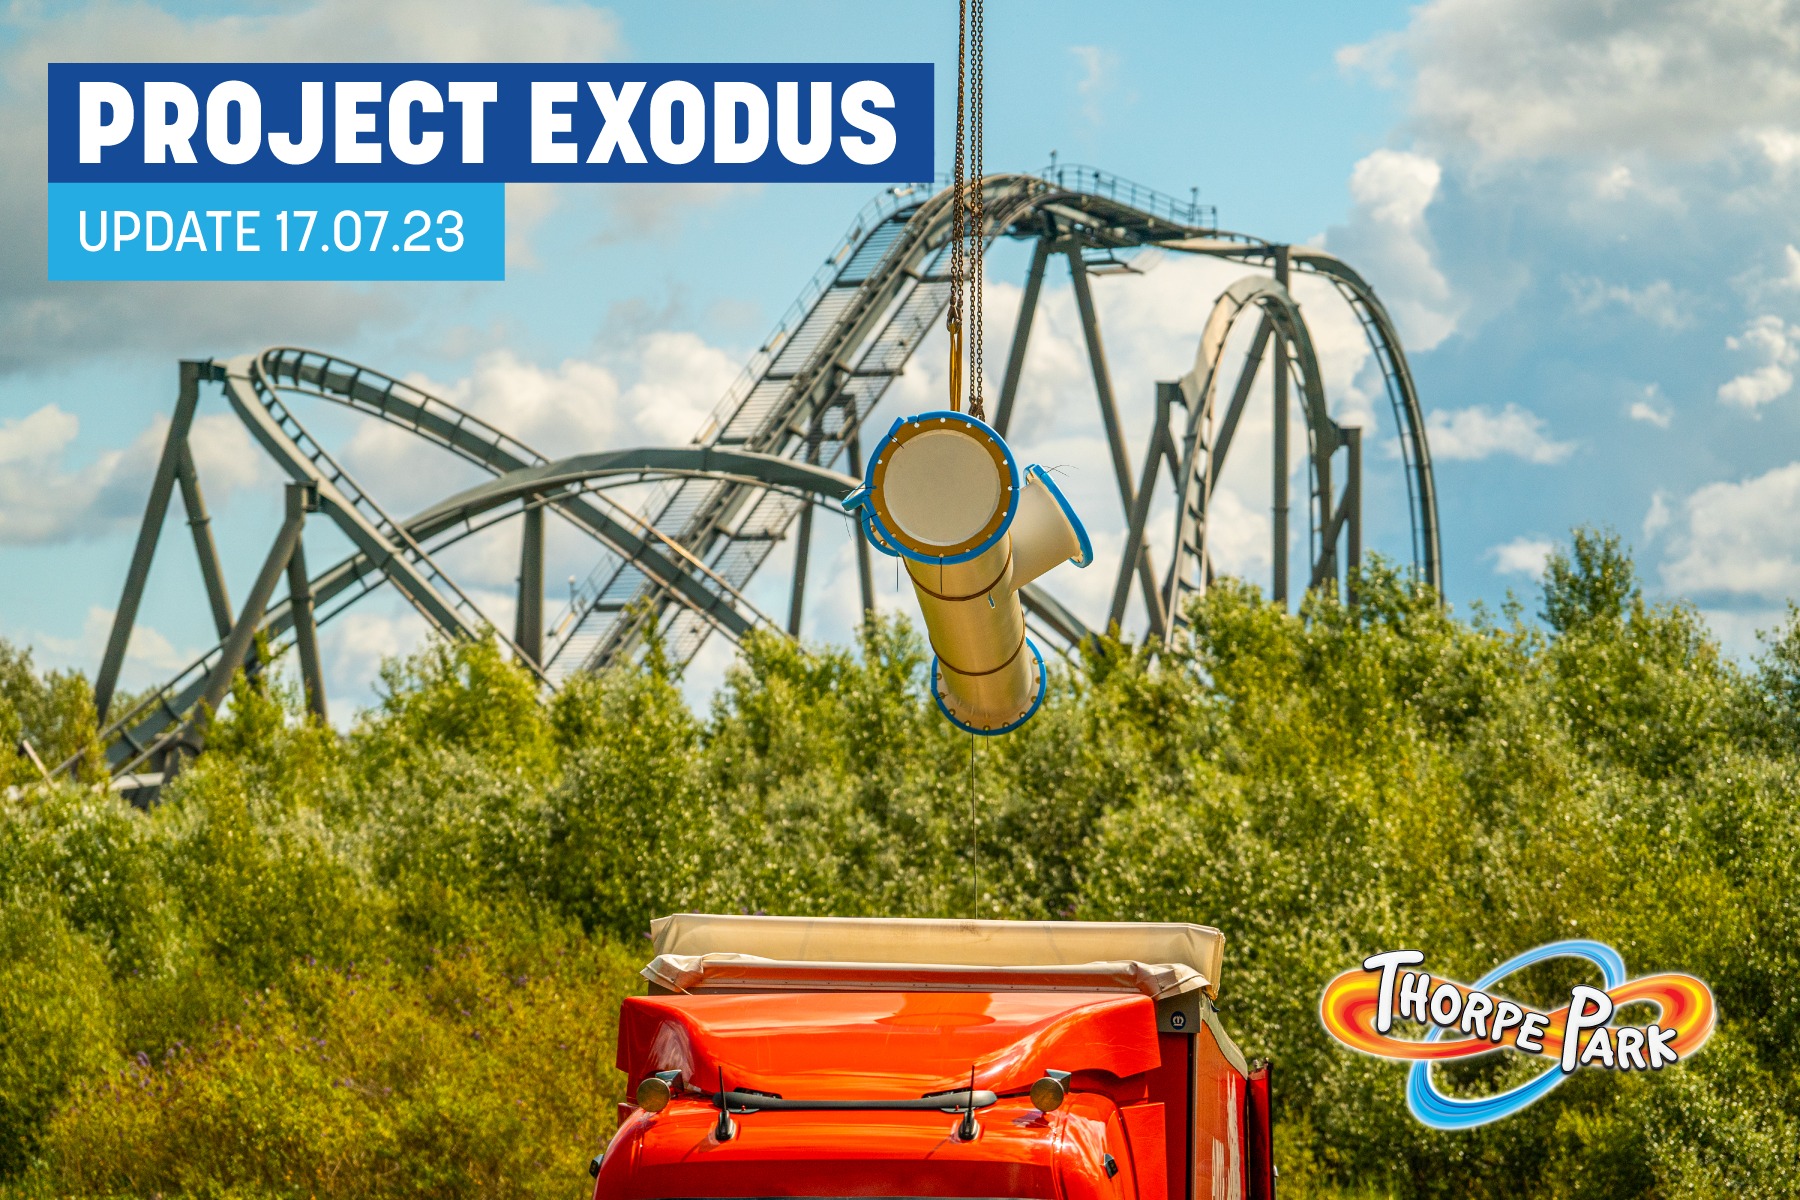 Ride Supports For Project Exodus Delivered